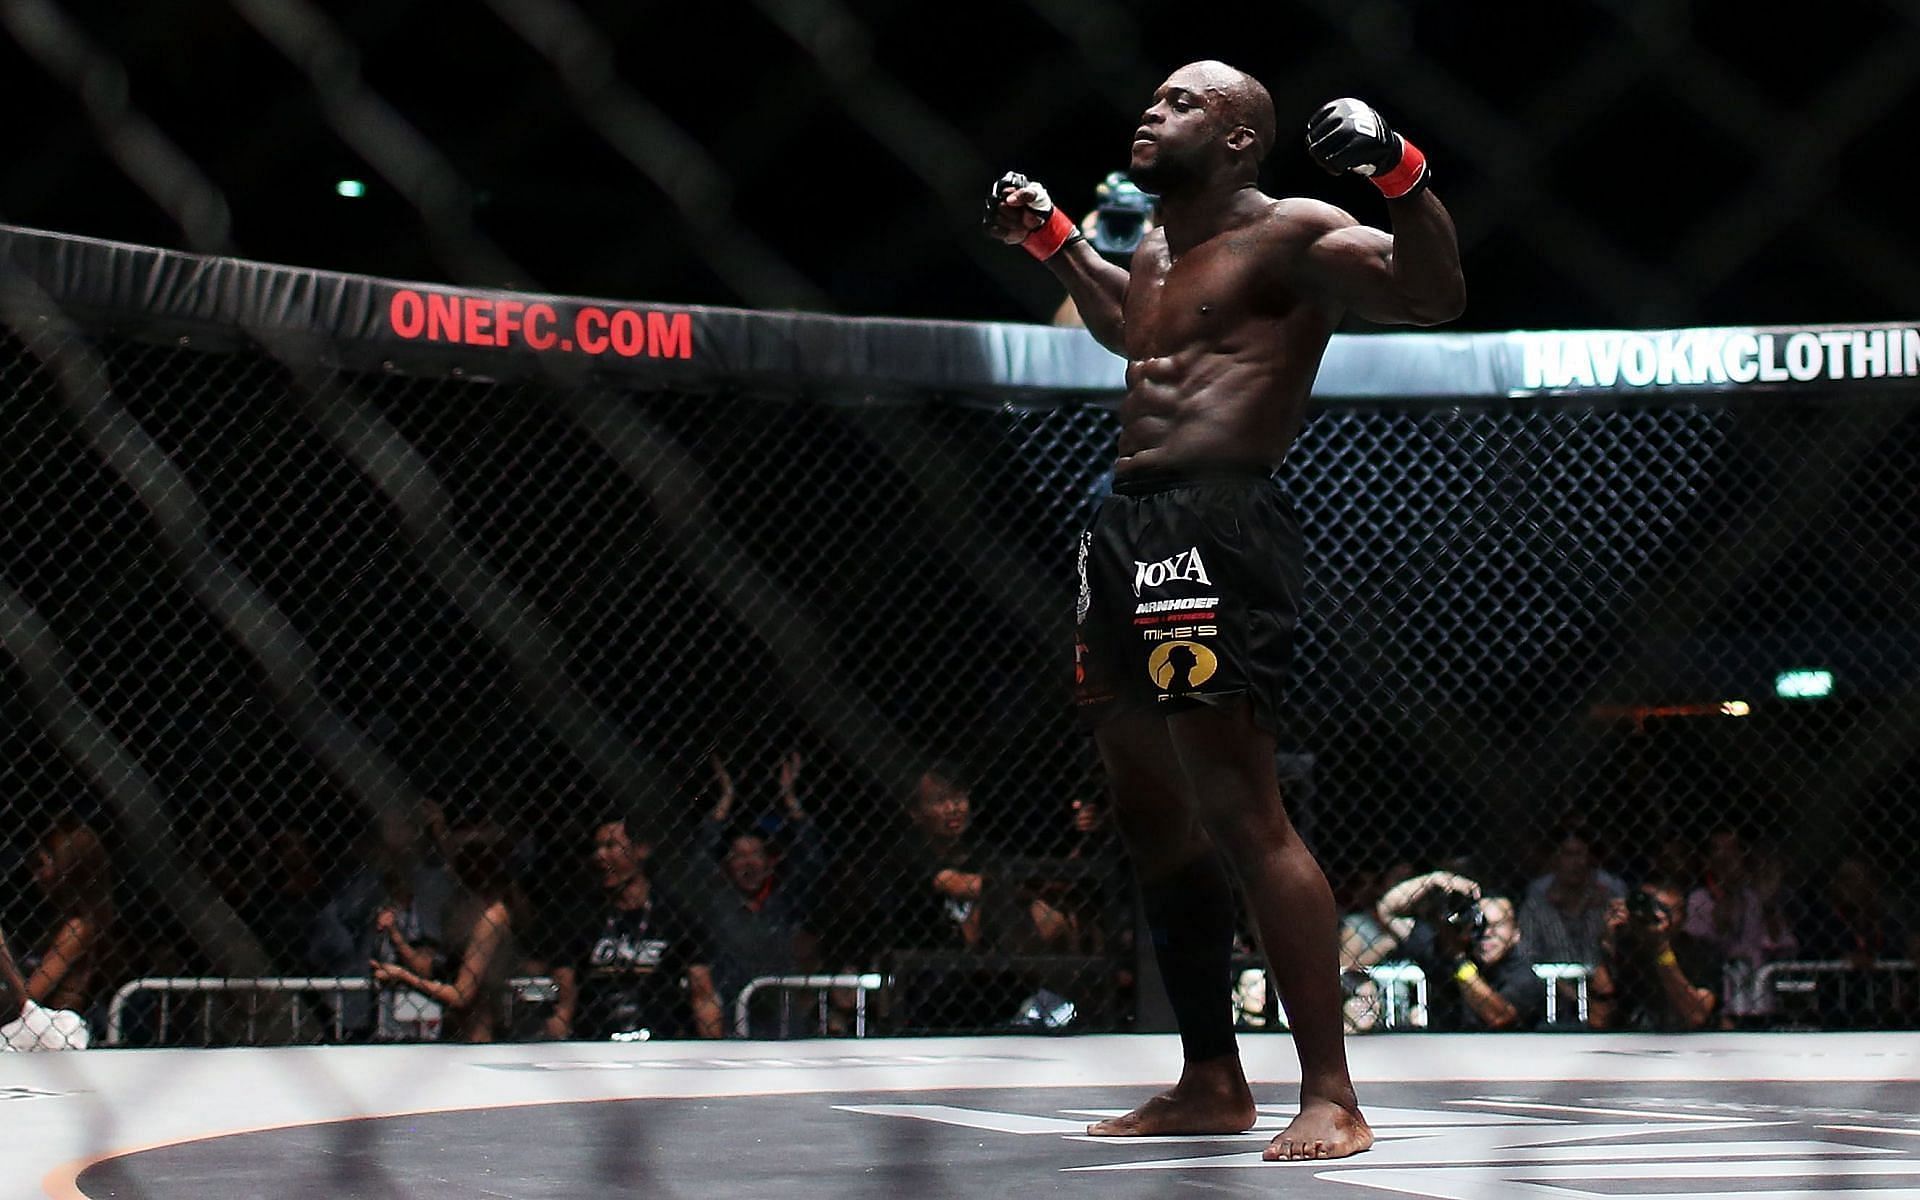 Mevlin Manhoef competed in One Fighting Championship